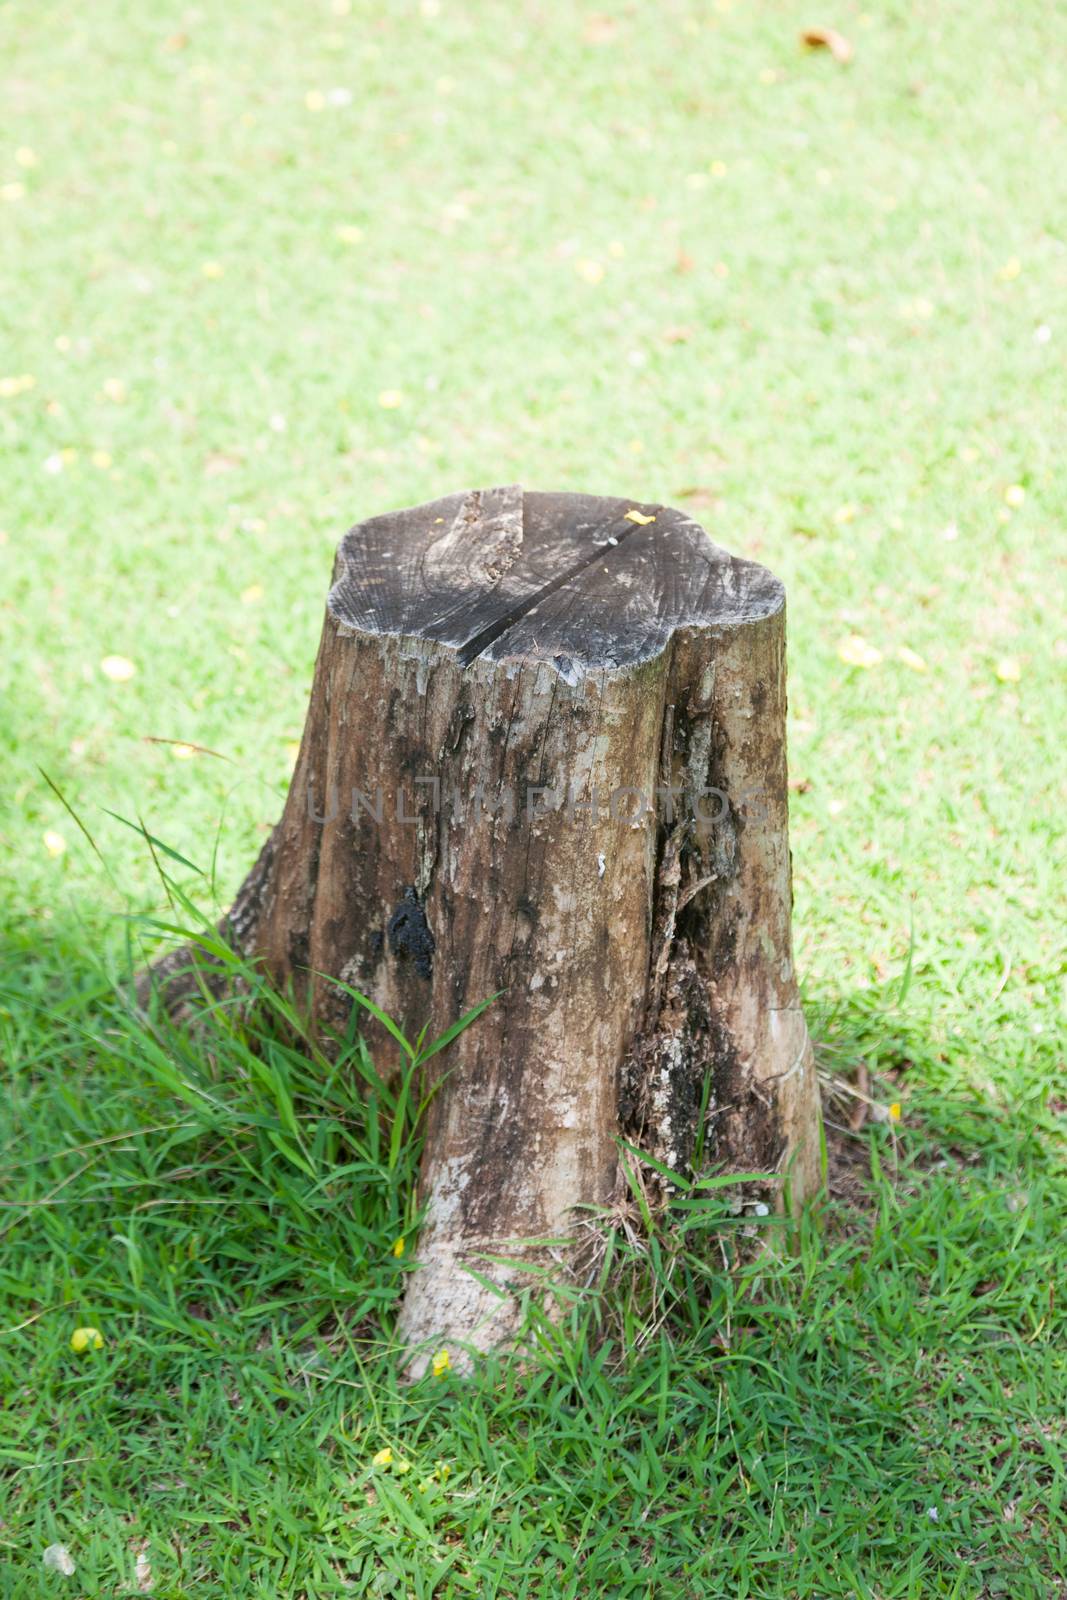 Stump on the lawn. The old tree stump and cut dry on the grass in the park.